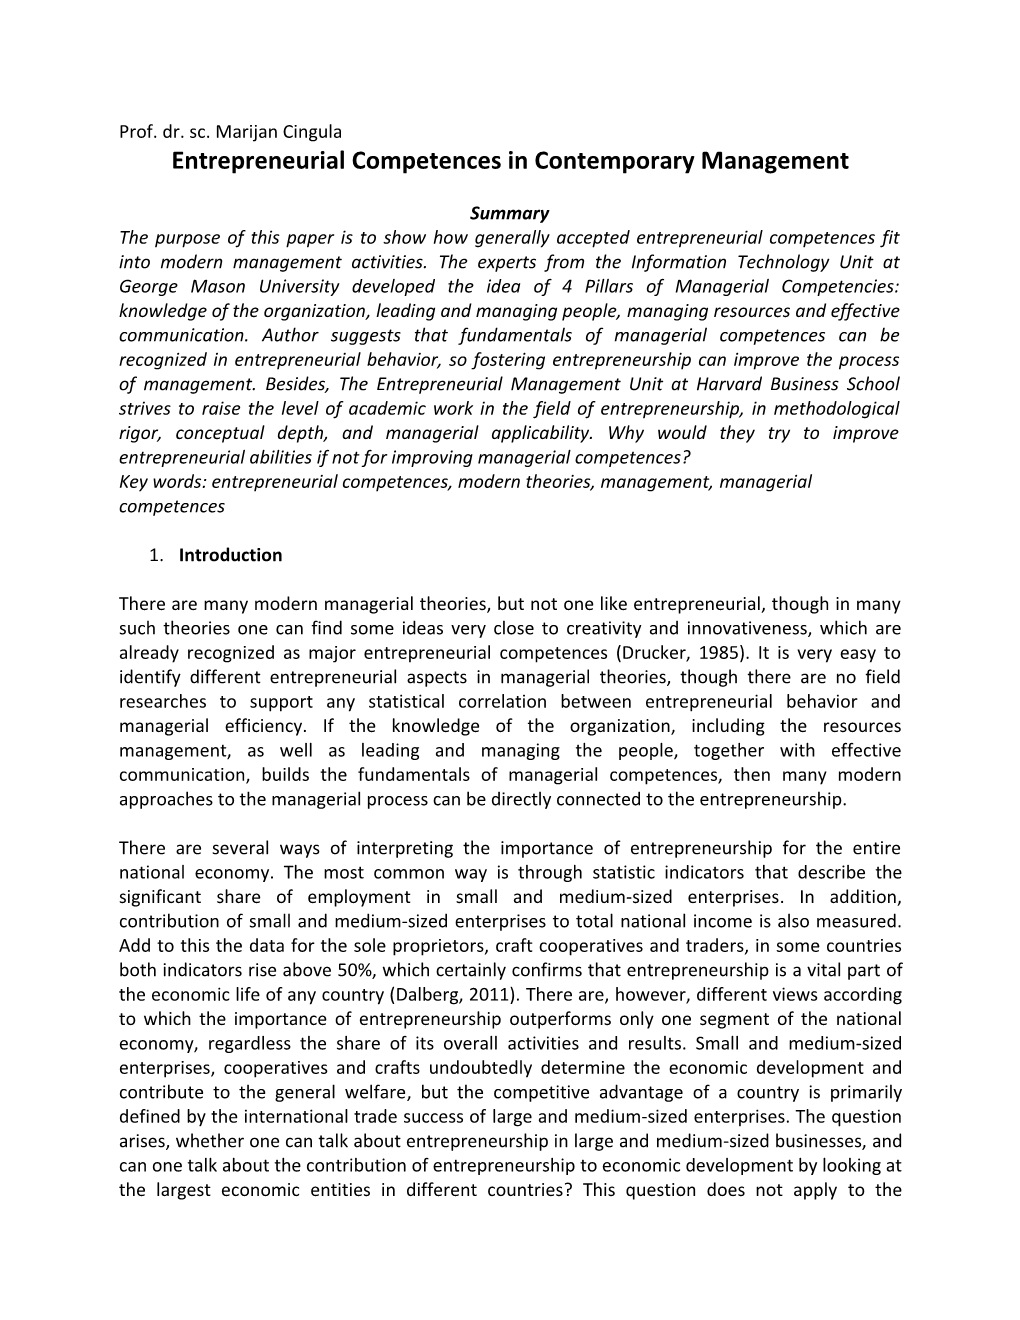 Entrepreneurial Competences in Contemporary Management